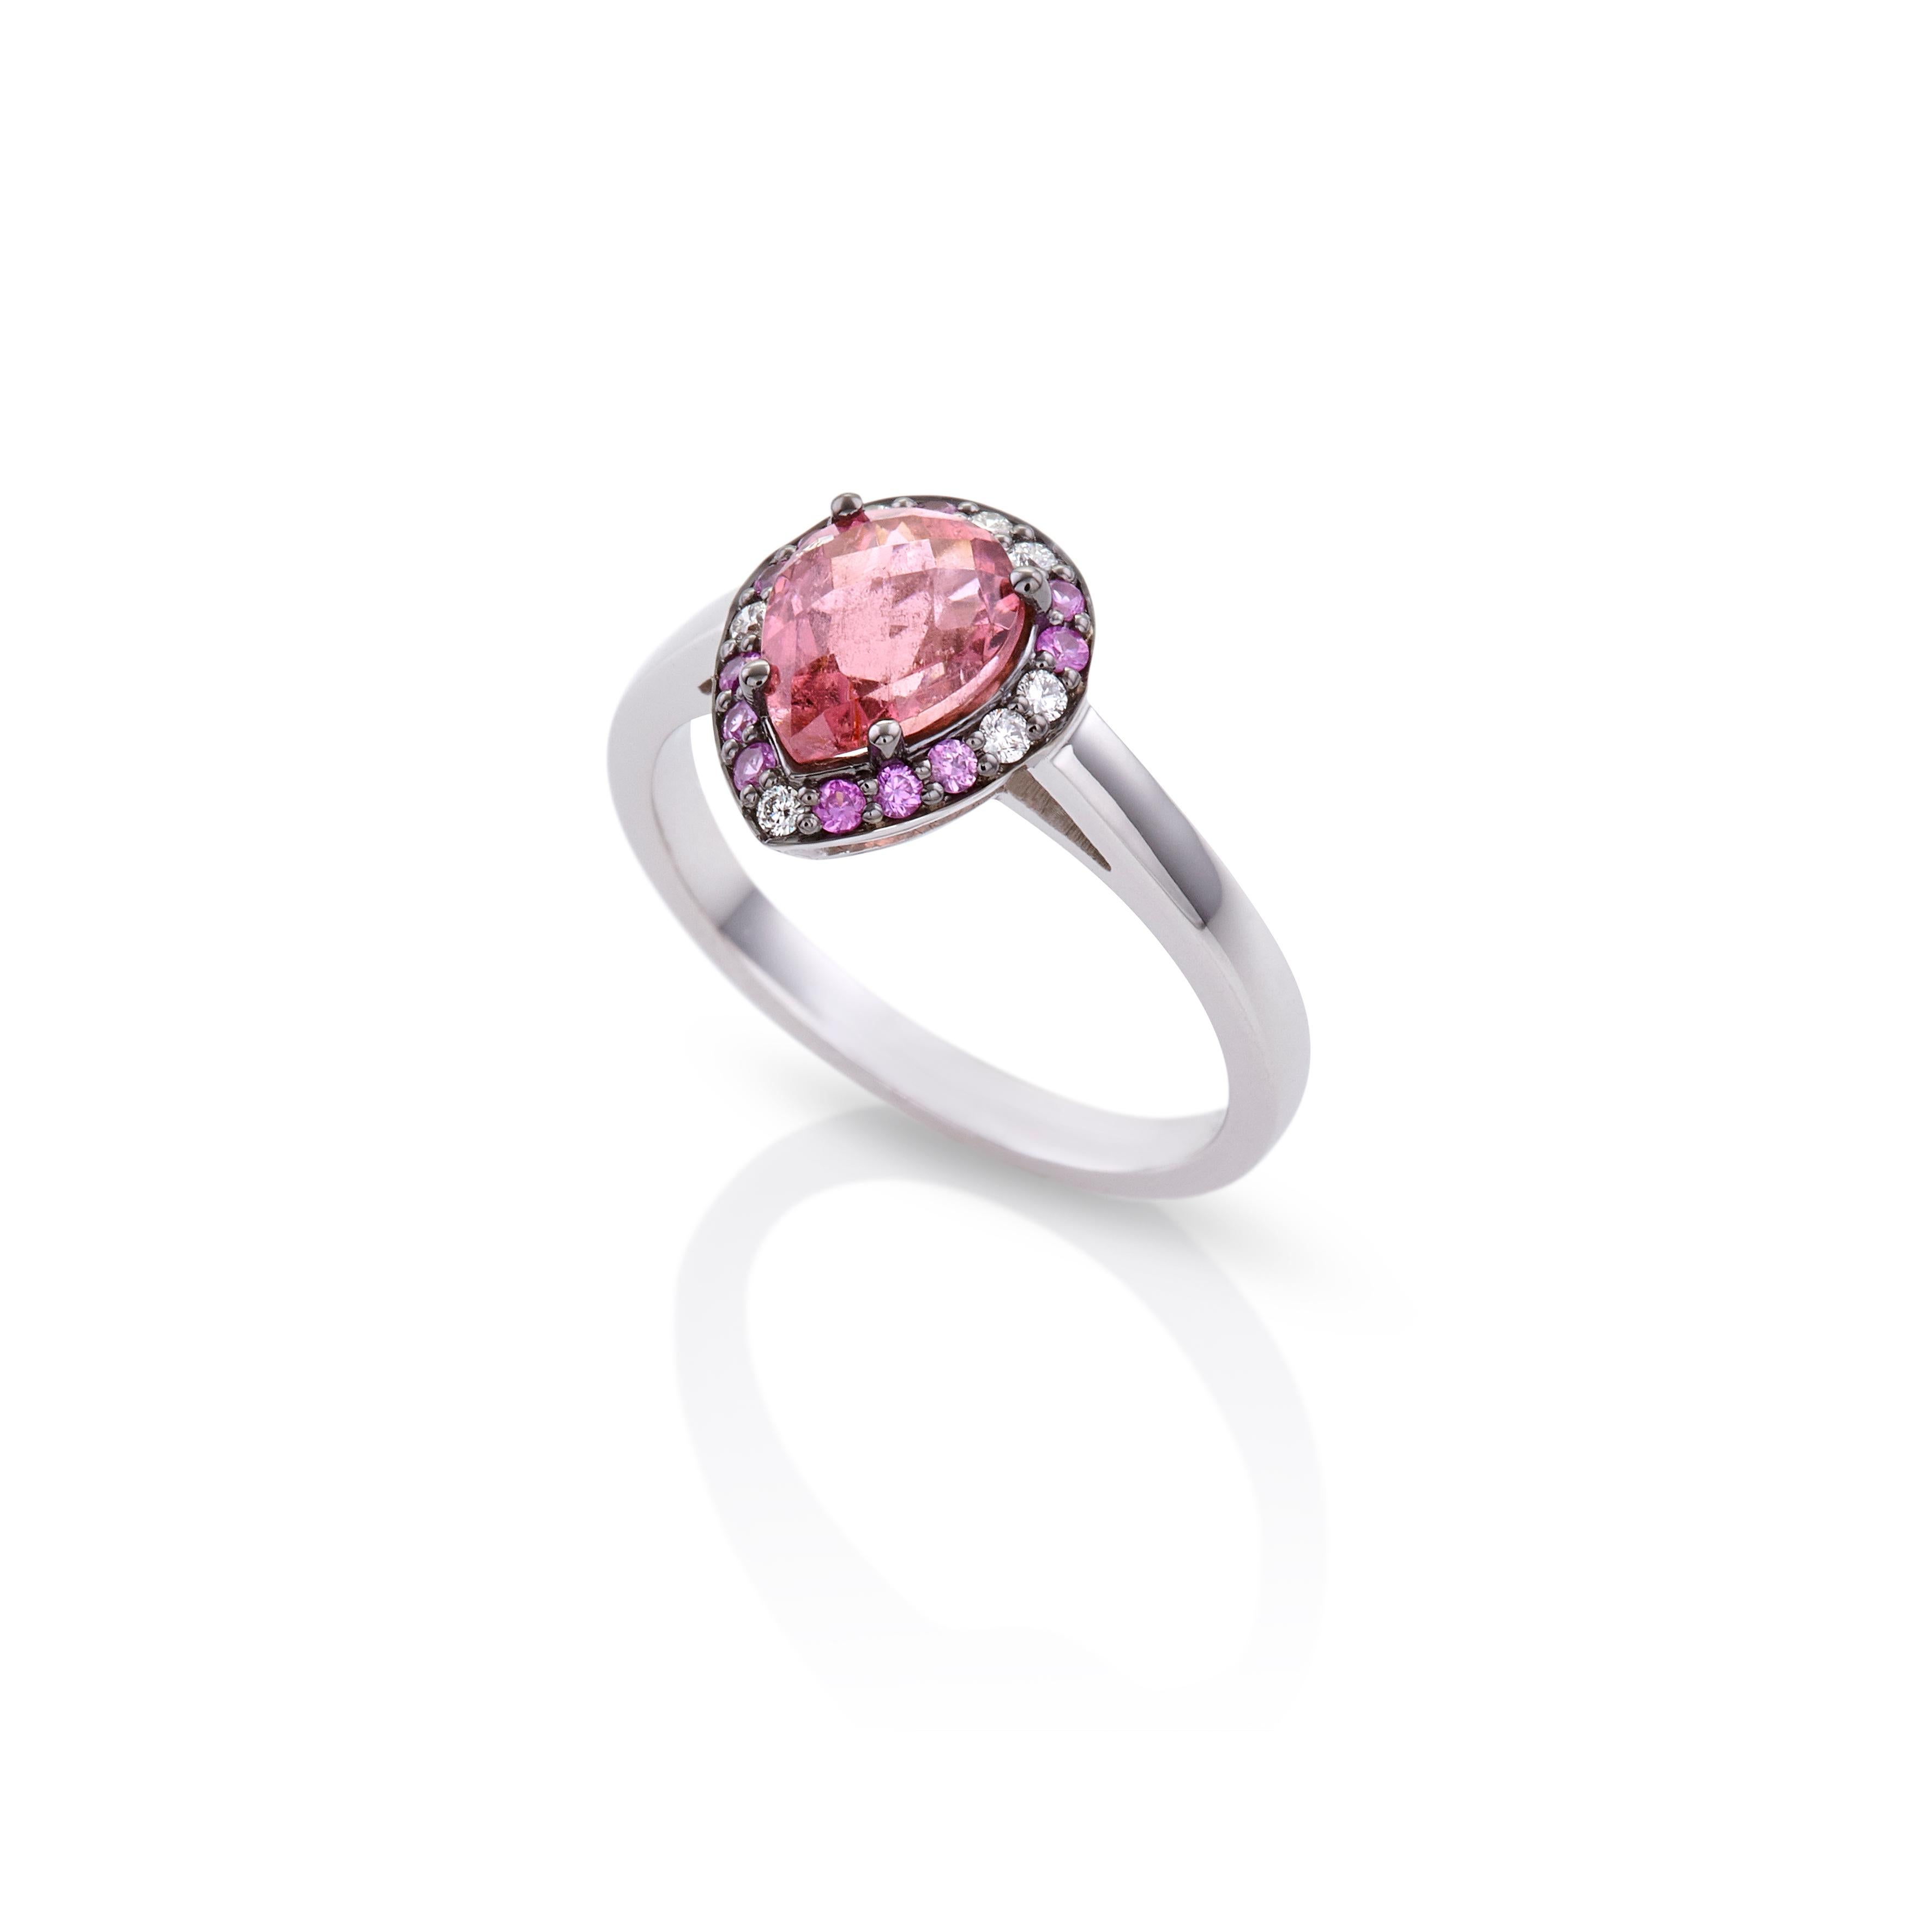 For Sale:  Colorful Drop Ring 18Kt White Gold with Red Tourmaline Pink Saphires and Diamond 3